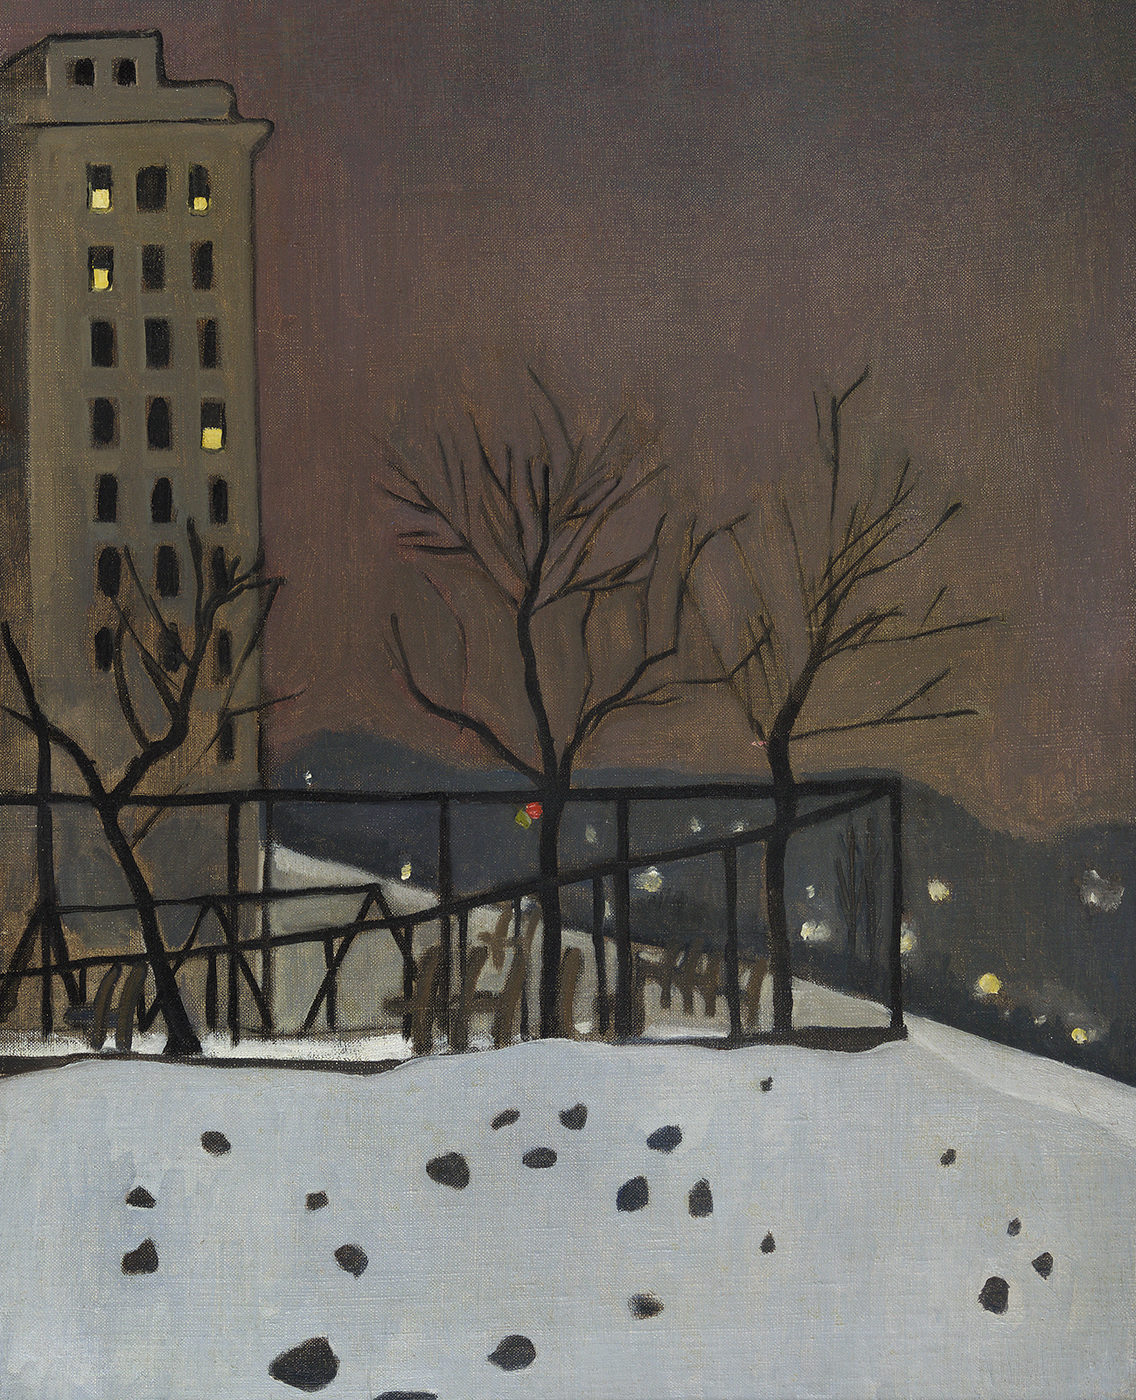 Painting of bare trees in snow, hills in background, apartment building on left